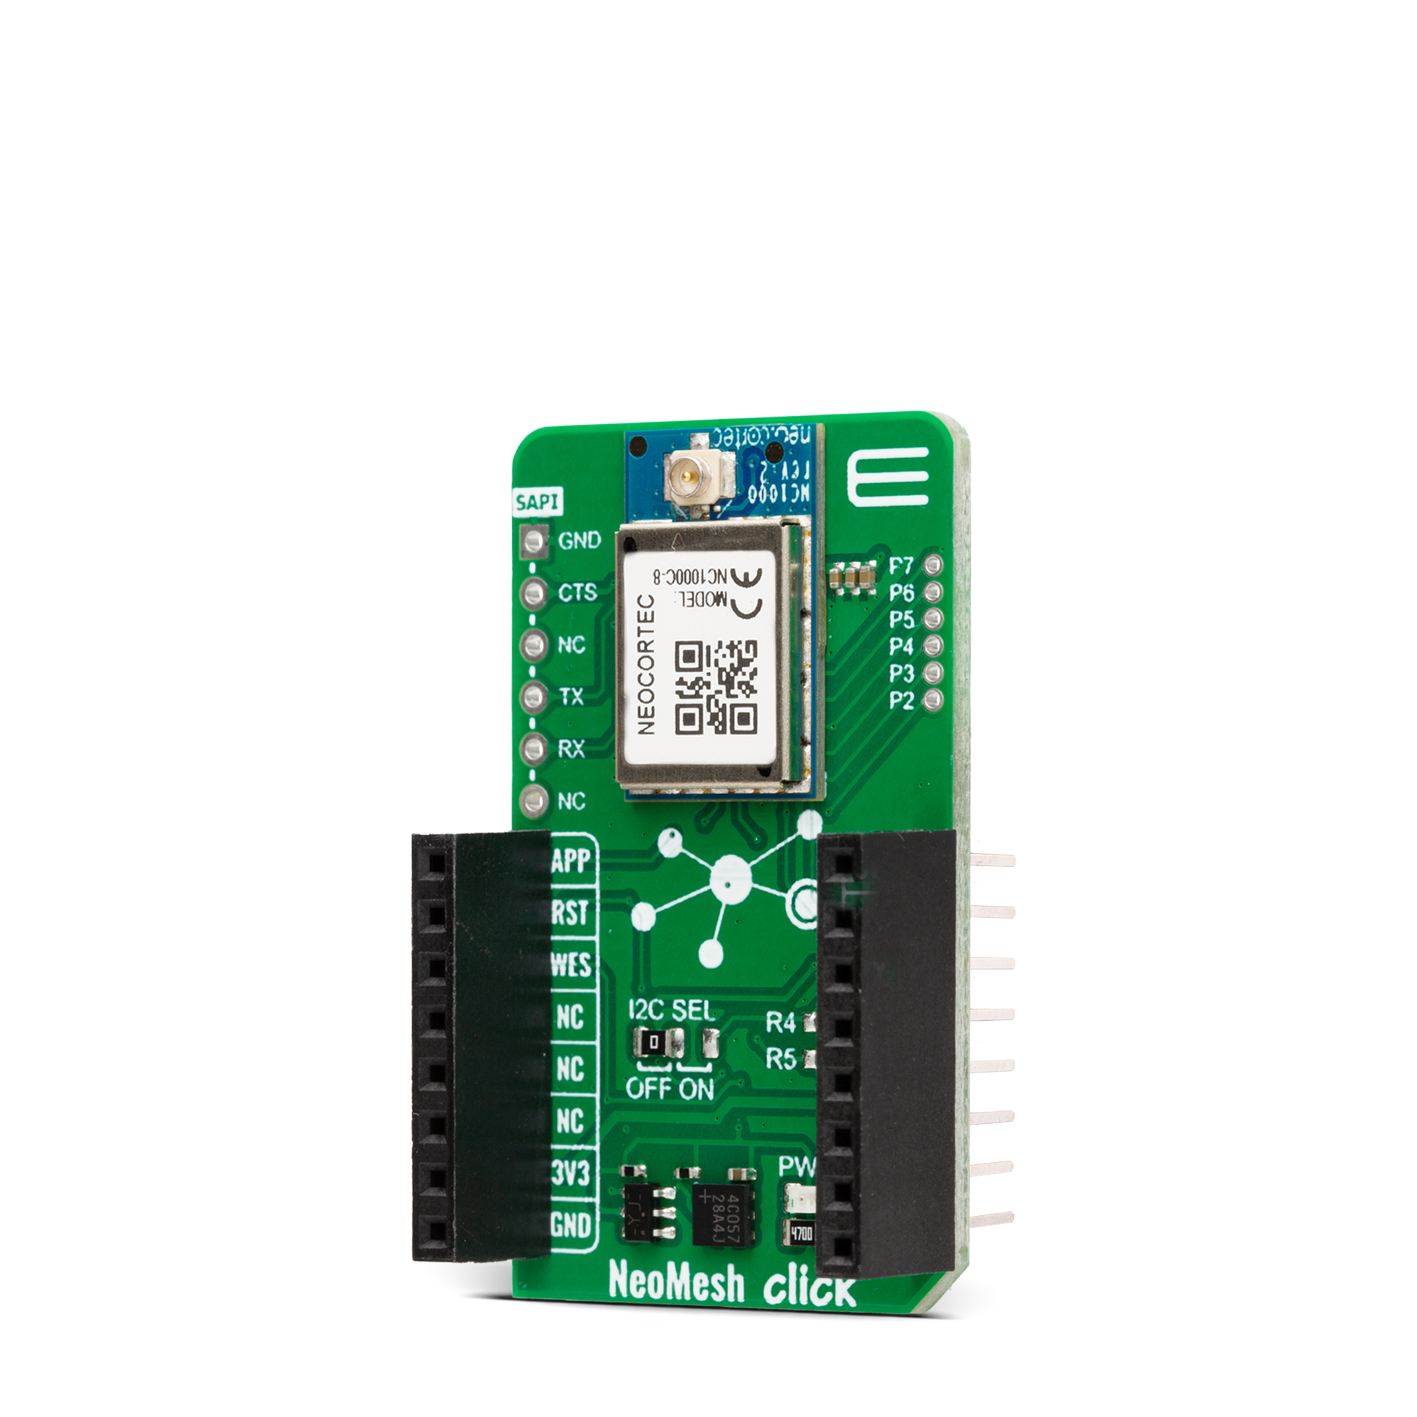 Full Sensor to Cloud Solutions Using NeoMesh Click Boards from MikroE and the IoTConnect Cloud Solution from Avnet